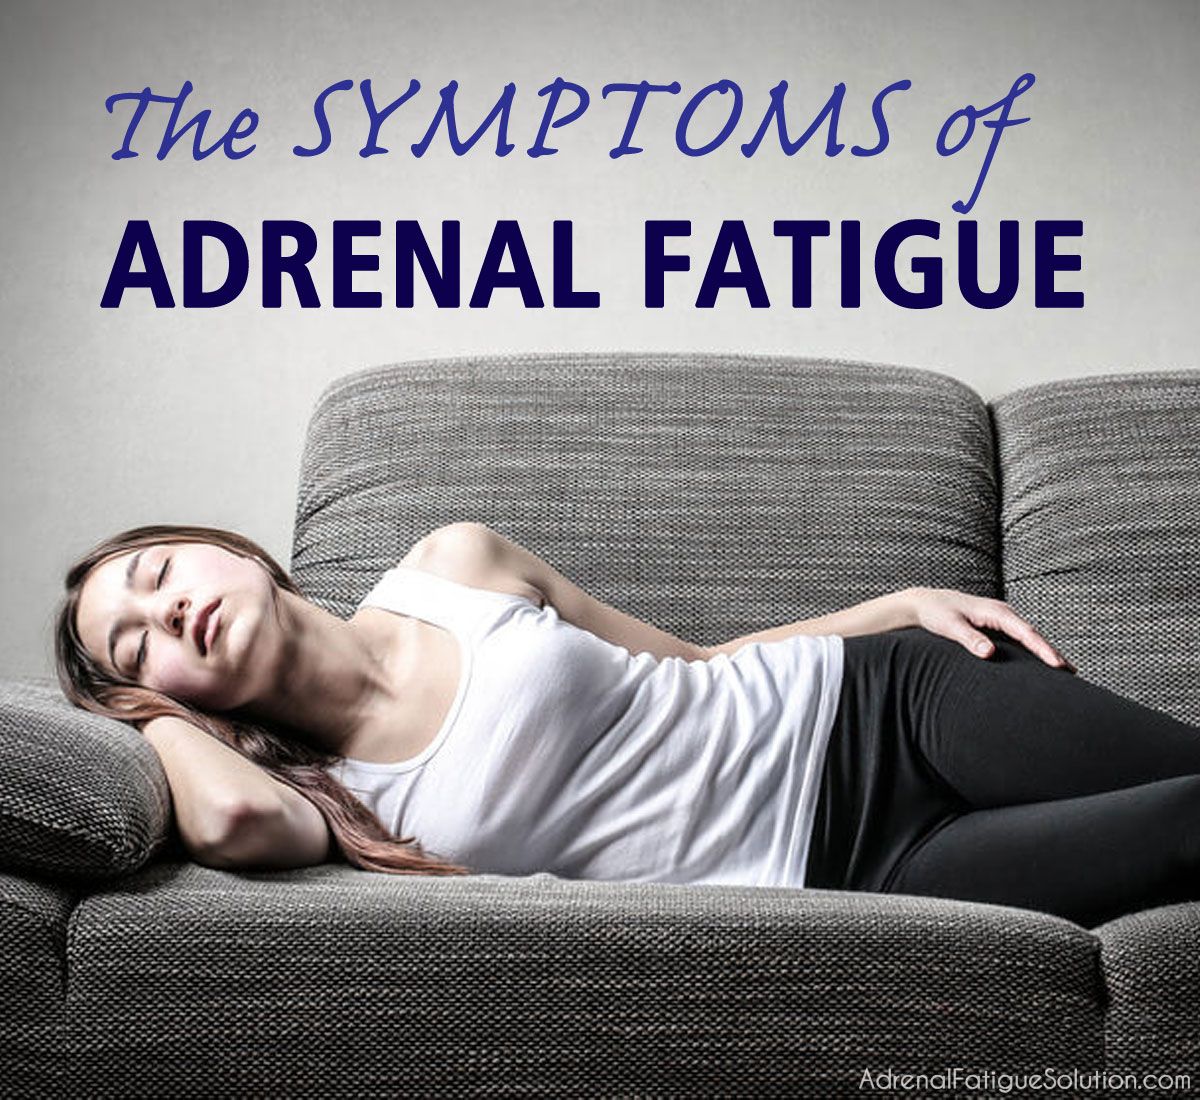 7 Common Adrenal Fatigue Symptoms (And How To Treat Them!)